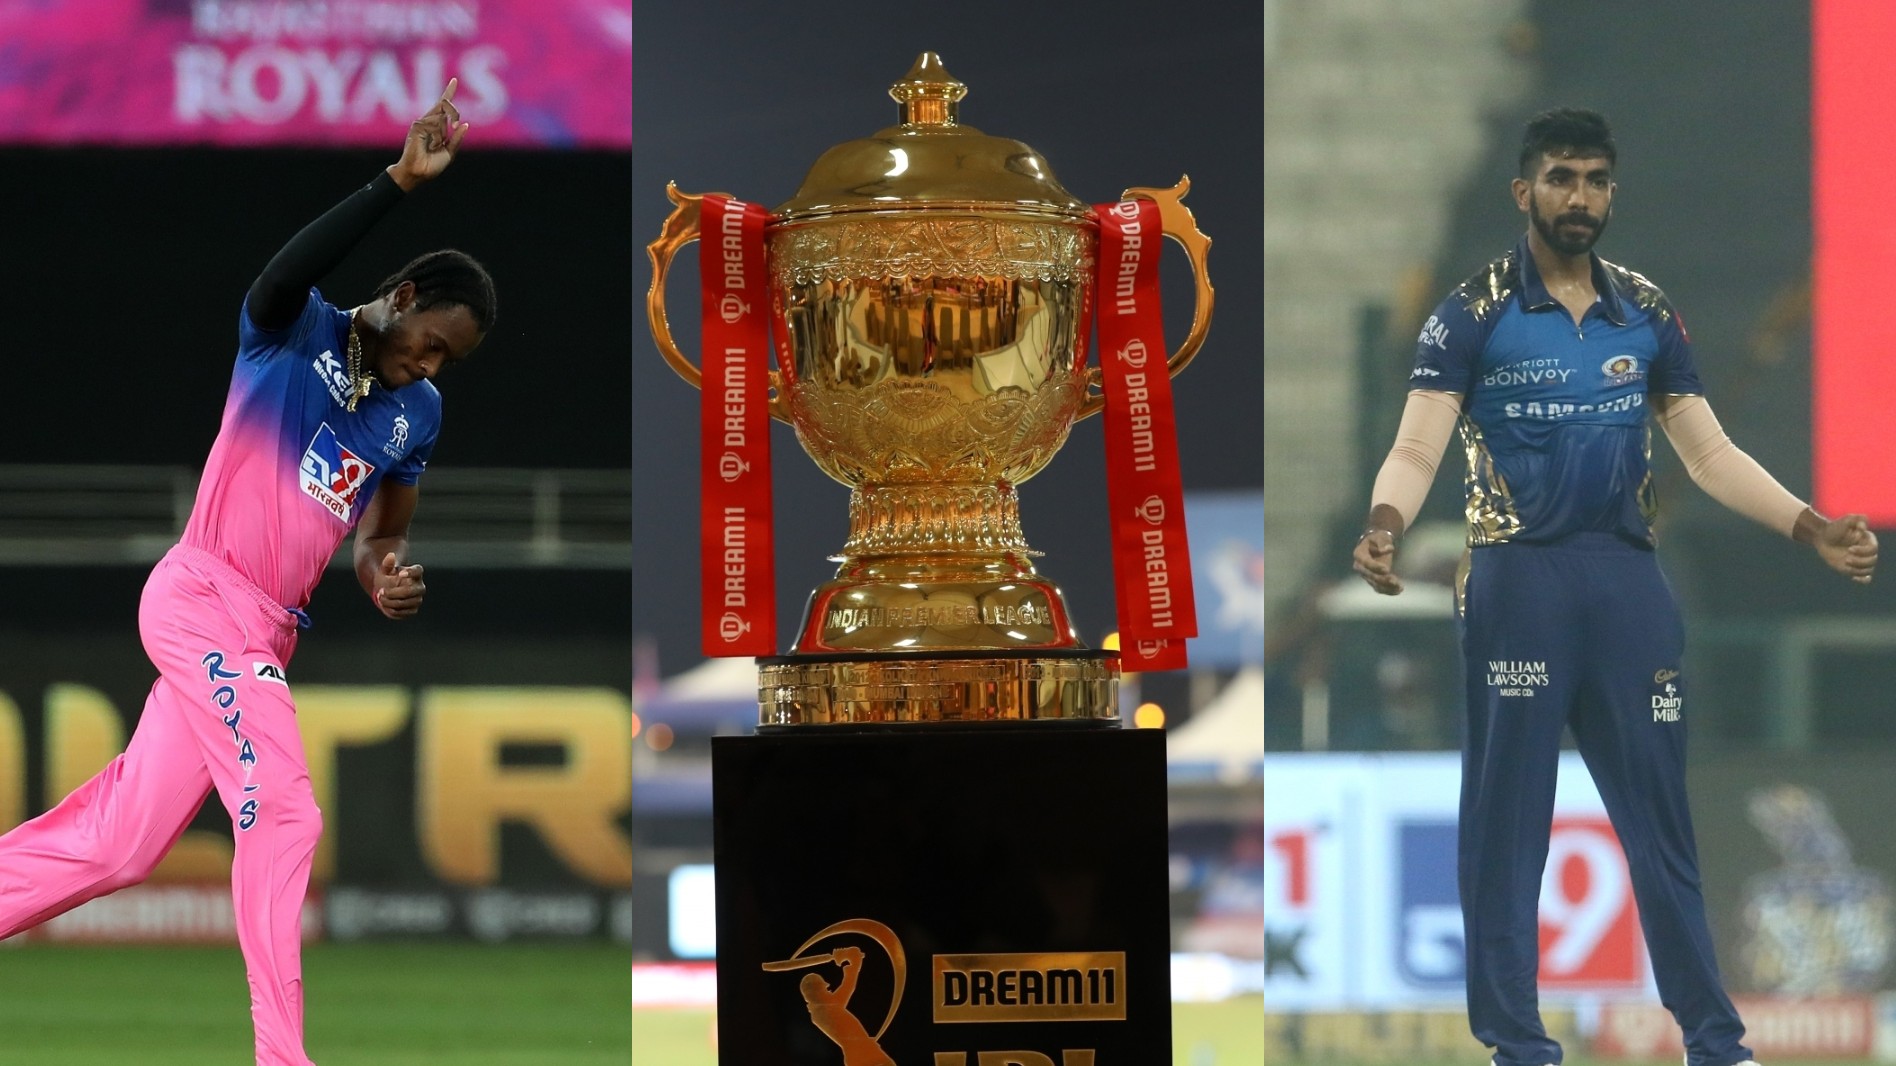 IPL 2020: Most Valuable Player (MVP) from each franchise